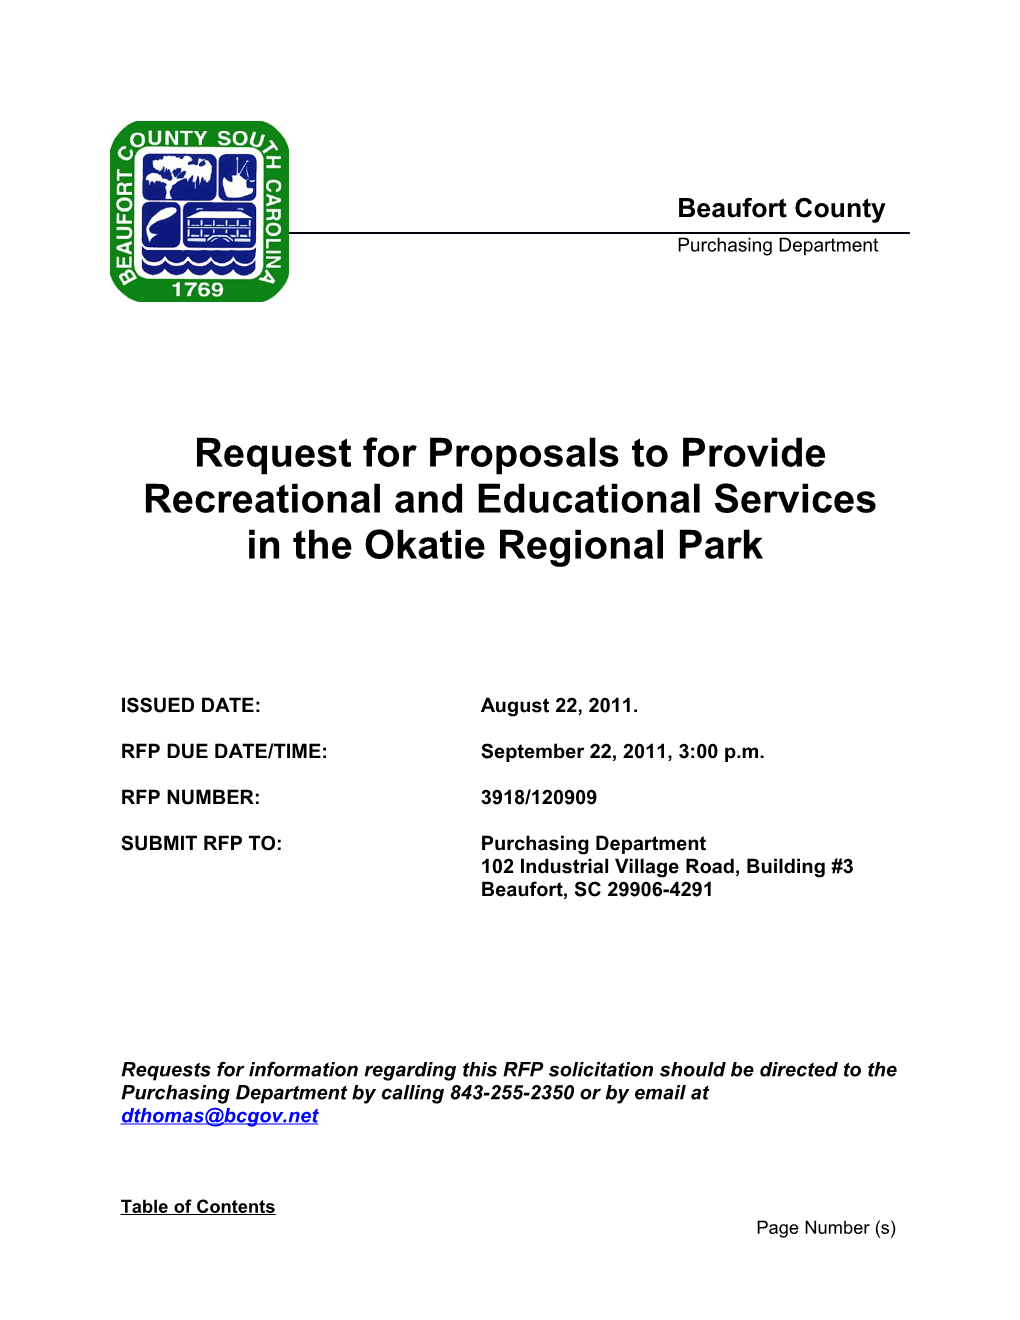 Request for Proposals to Provide Recreational and Educational Services in the Okatie Regional